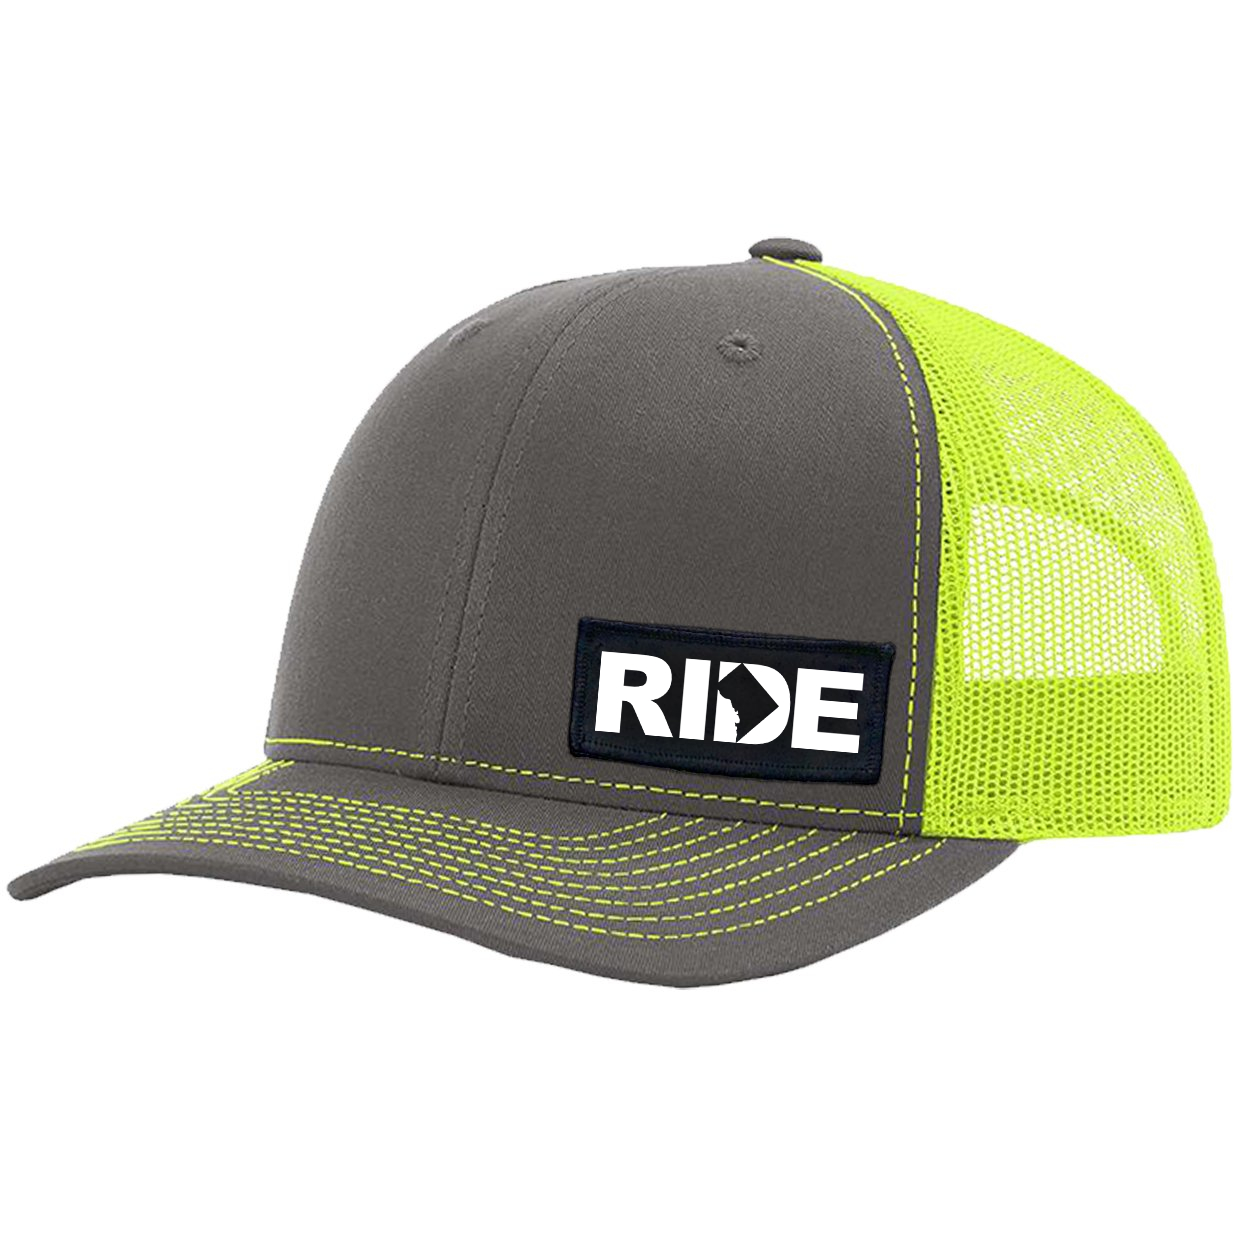 Ride District of Columbia Night Out Woven Patch Snapback Trucker Hat Charcoal/Neon Yellow (White Logo)